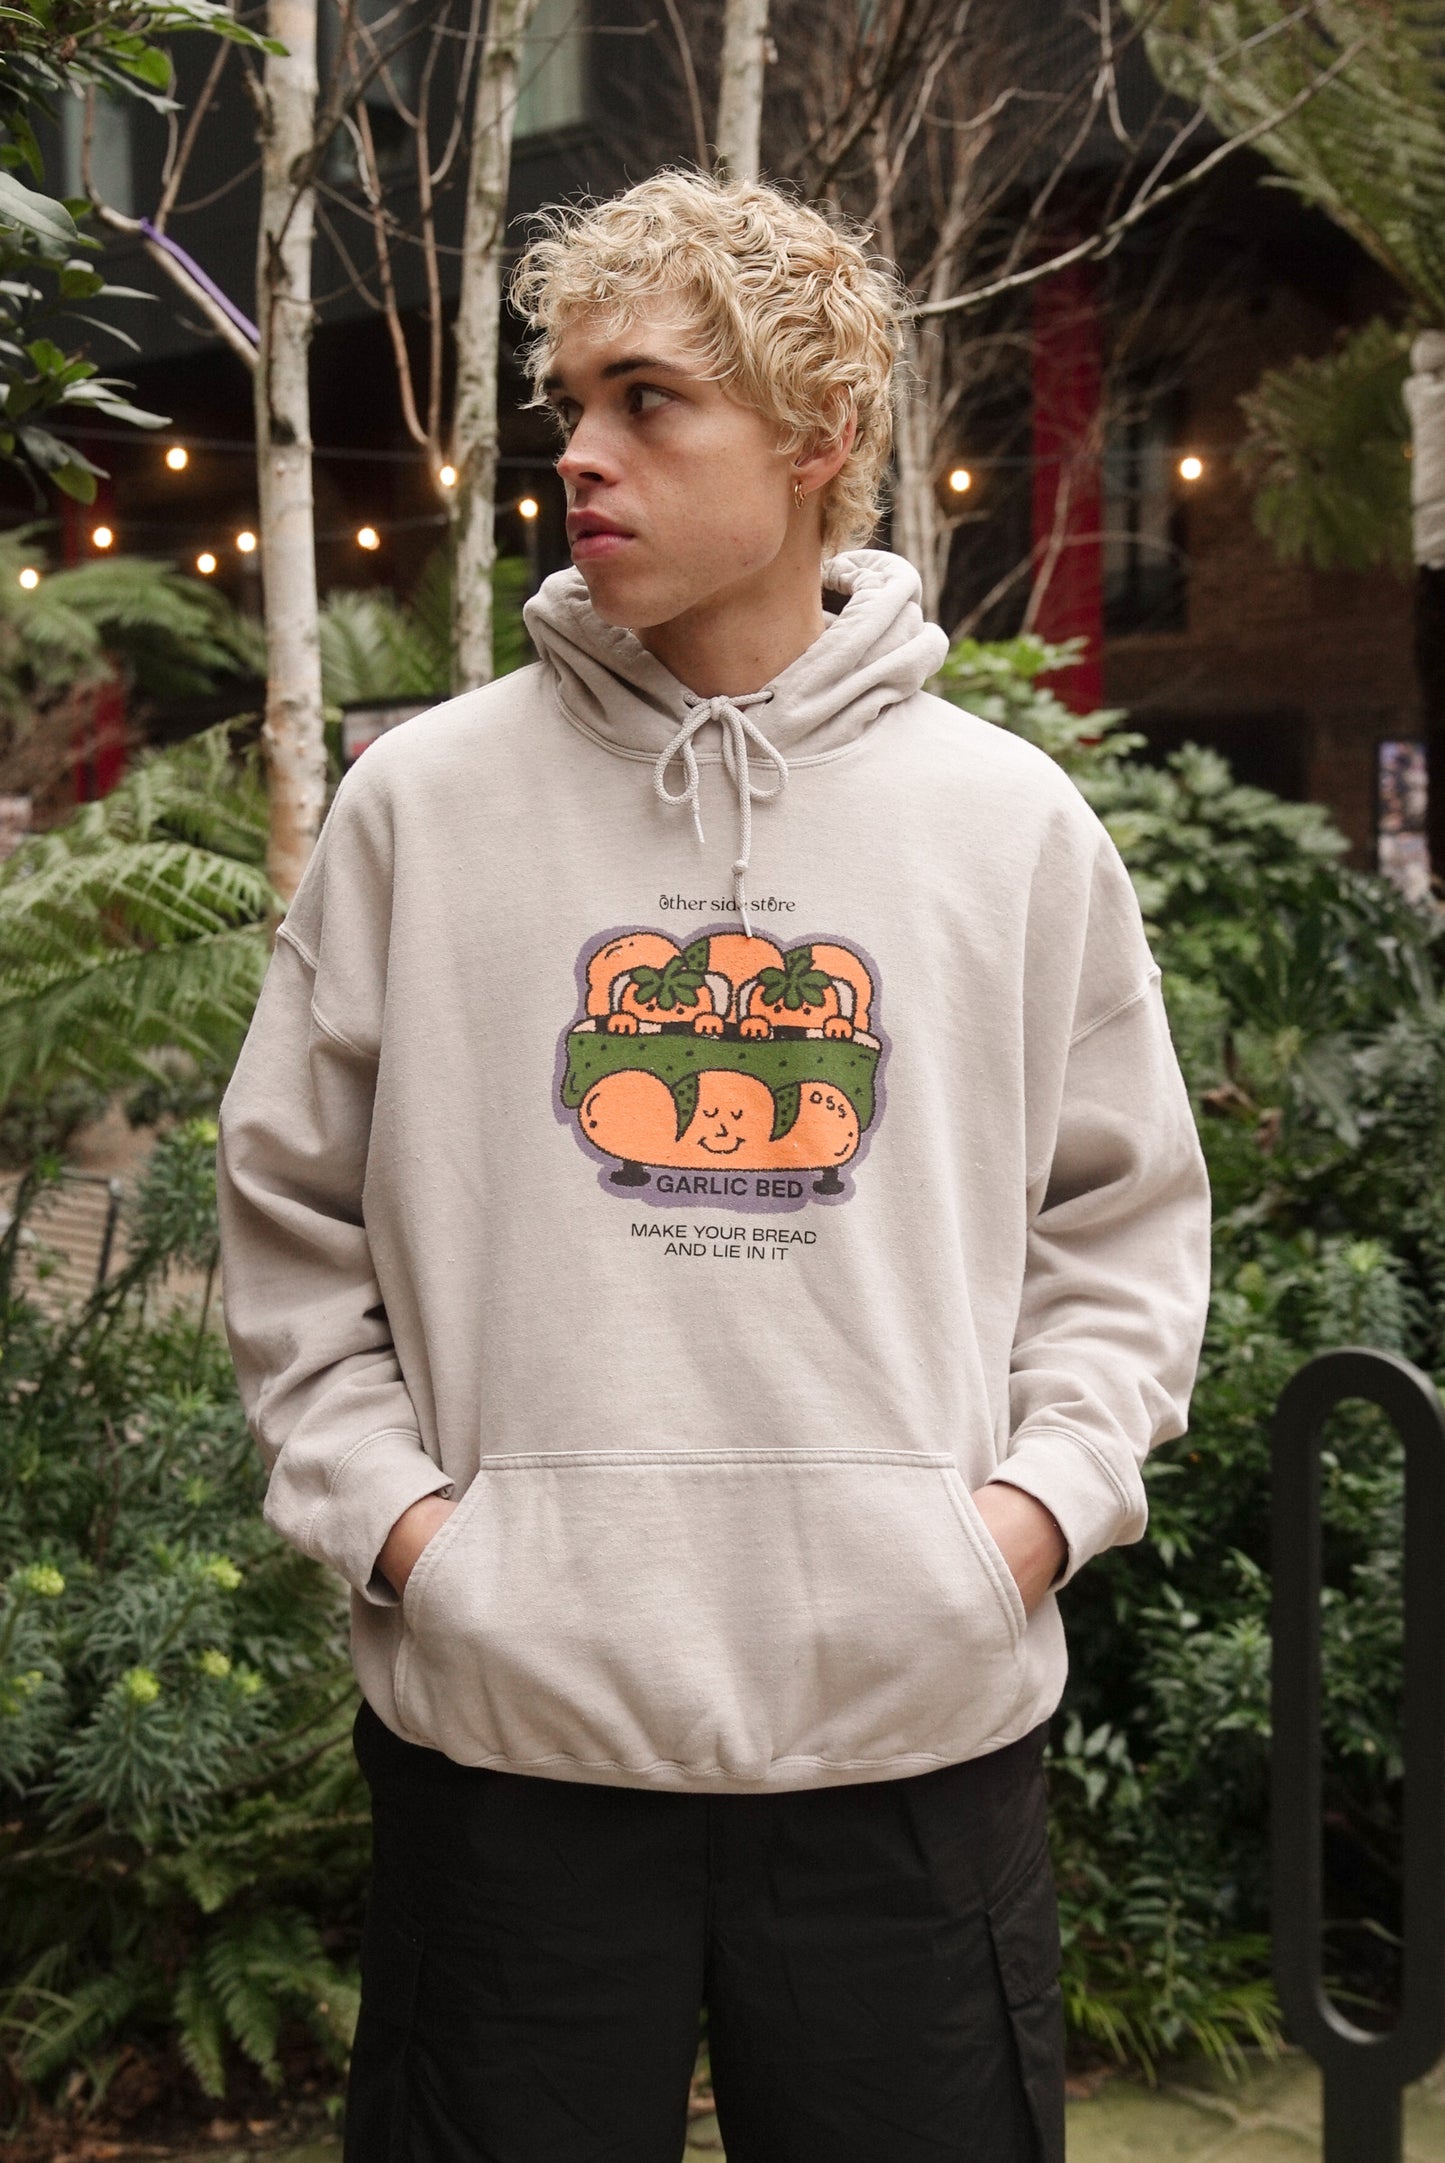 Other Side Store 'Garlic Bed' Vintage Washed Hoodie - Sand